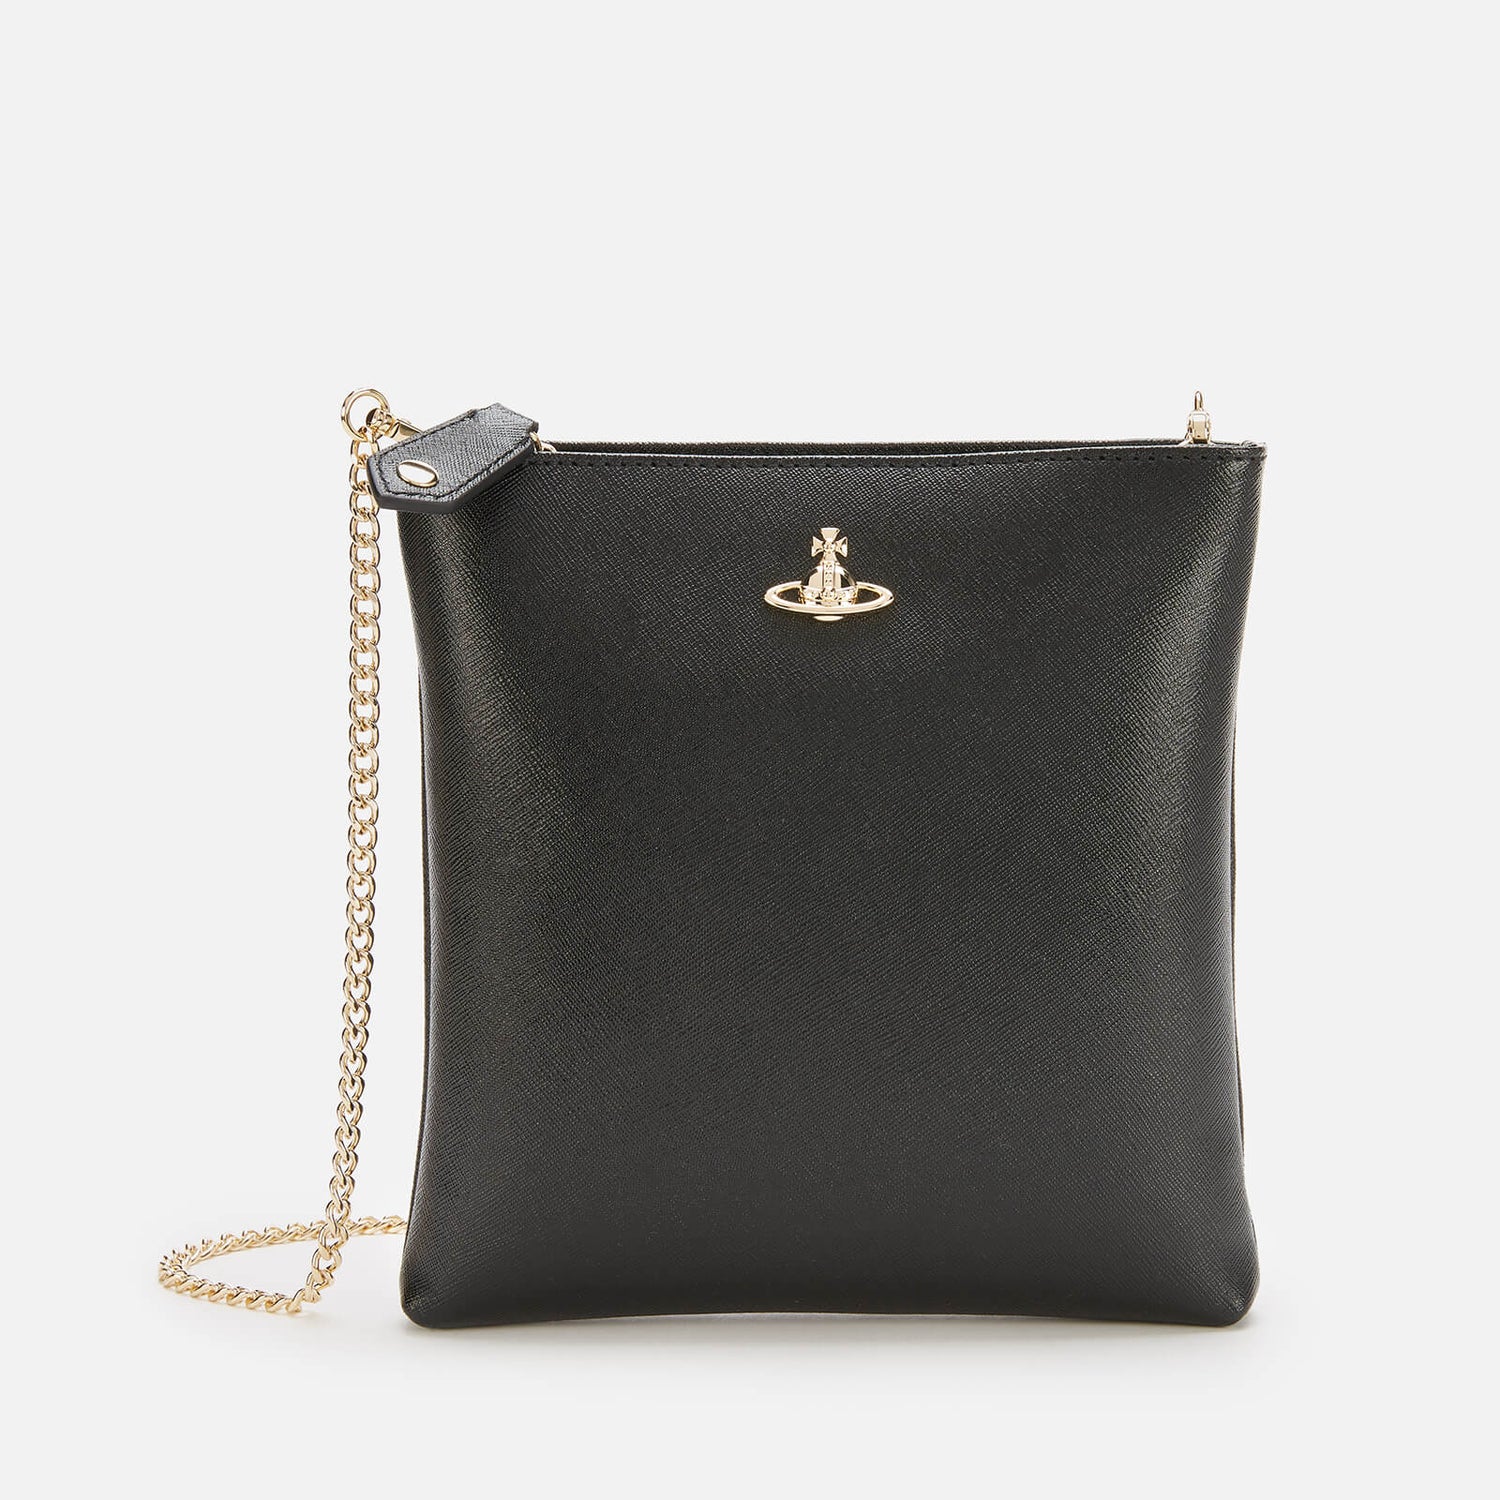 Vivienne Westwood Women's Squire Square Cross Body With Chain - Black